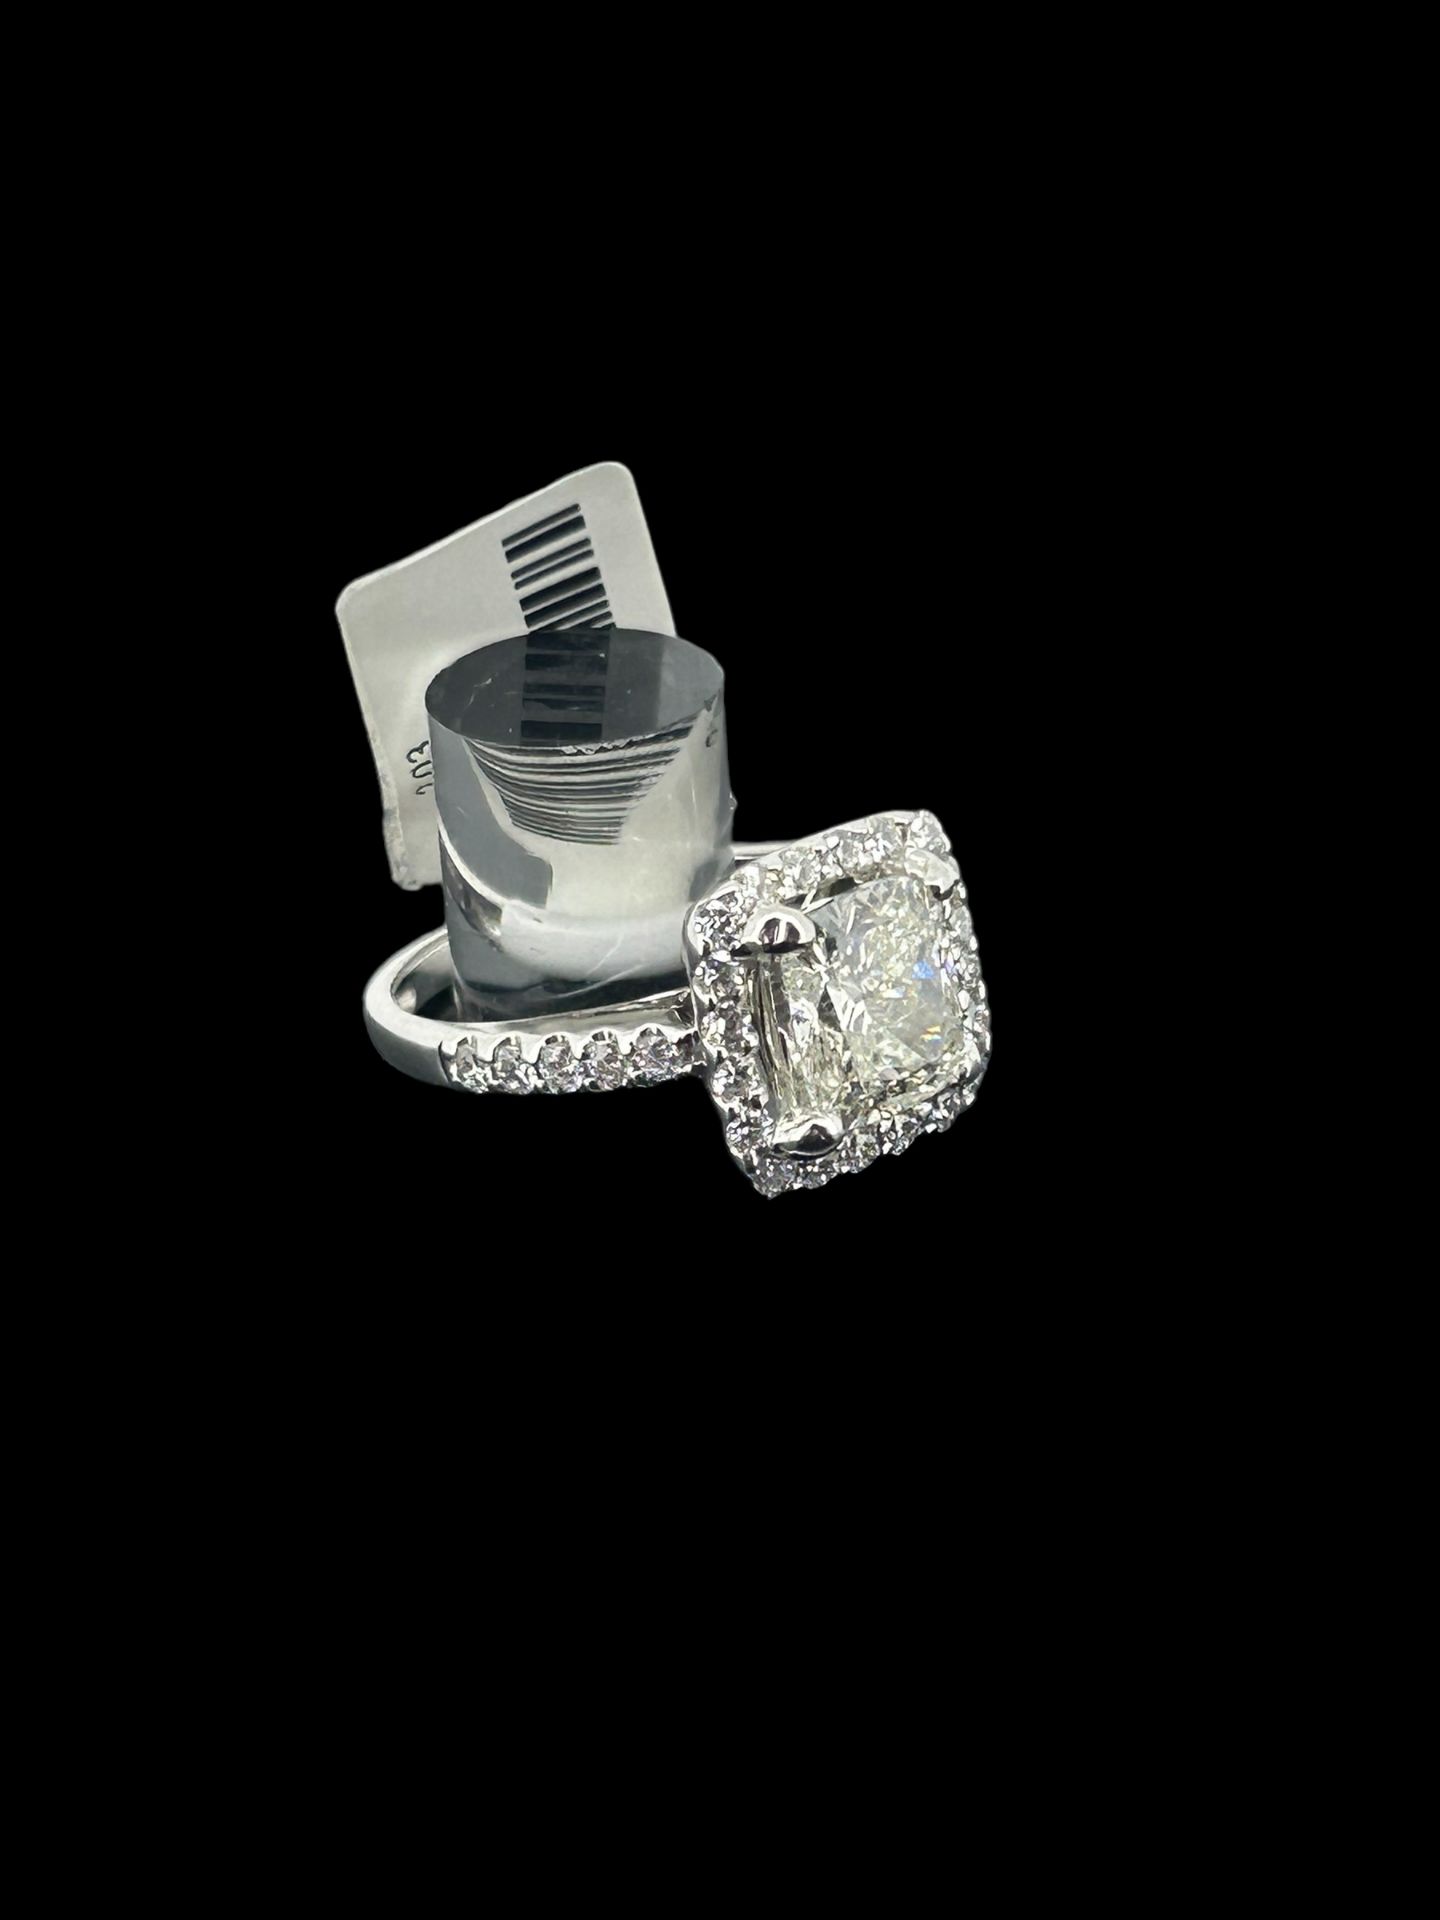 14k white gold ring set with 2.03 carat cushion cut stone and 0.65 diamonds in the shank